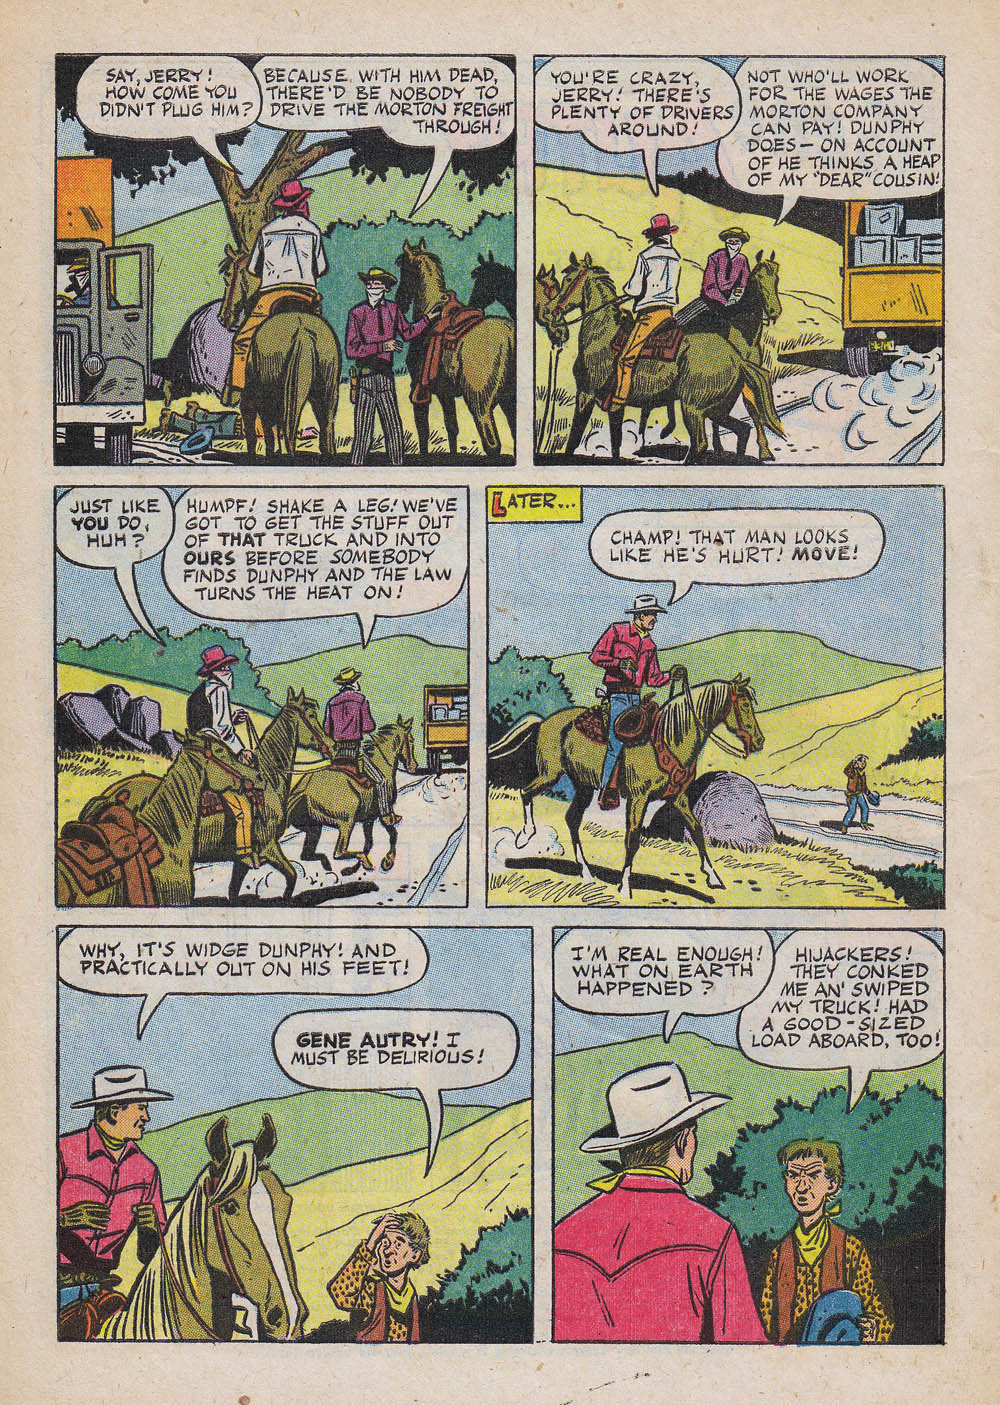 Gene Autry Comics (1946) issue 87 - Page 4